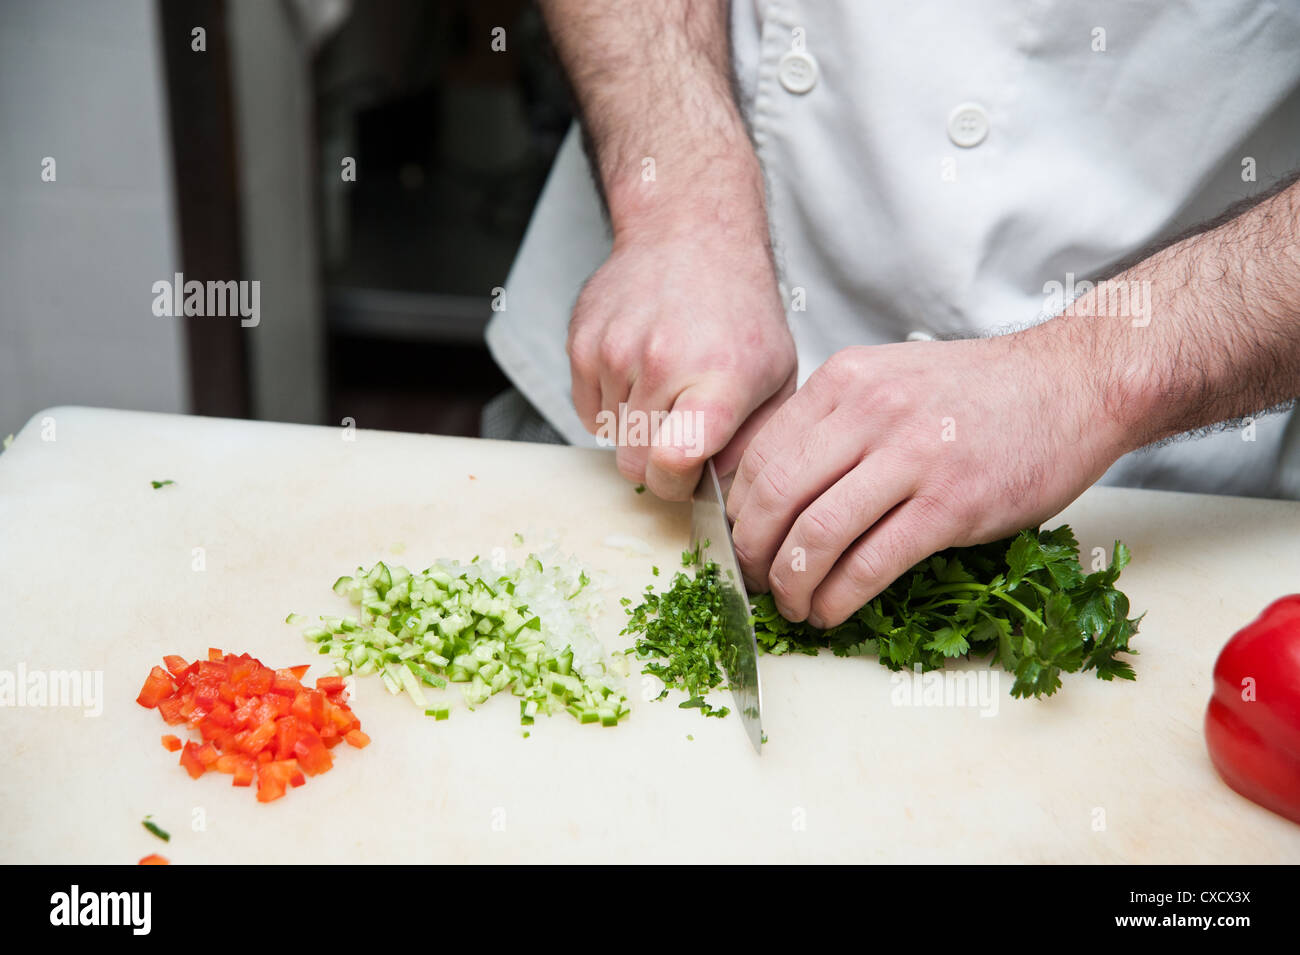 https://c8.alamy.com/comp/CXCX3X/chef-cuts-vegetables-for-a-salad-close-up-of-the-hands-and-knife-CXCX3X.jpg